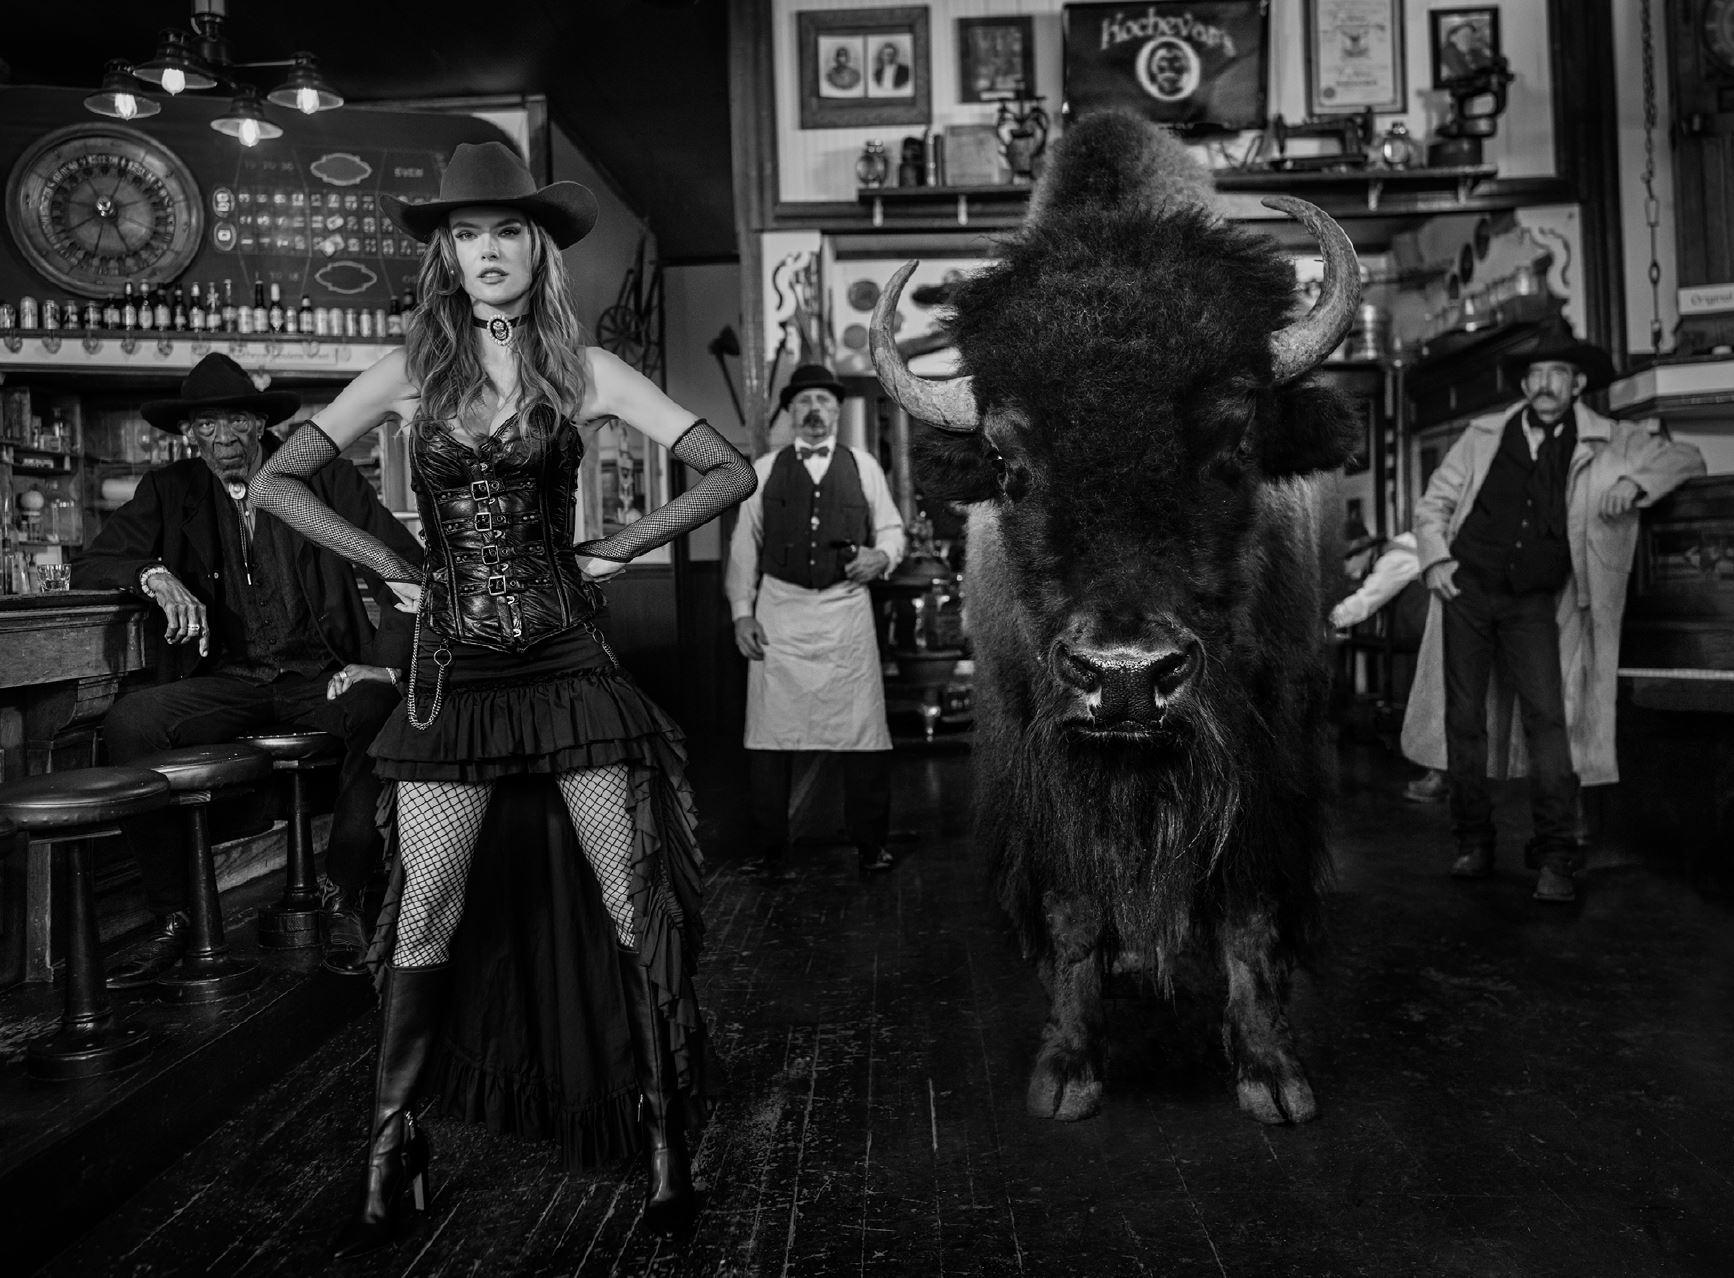 David Yarrow Black and White Photograph - Russian Roulette - Model and Bison in a Western Bar, fine art photography, 2024